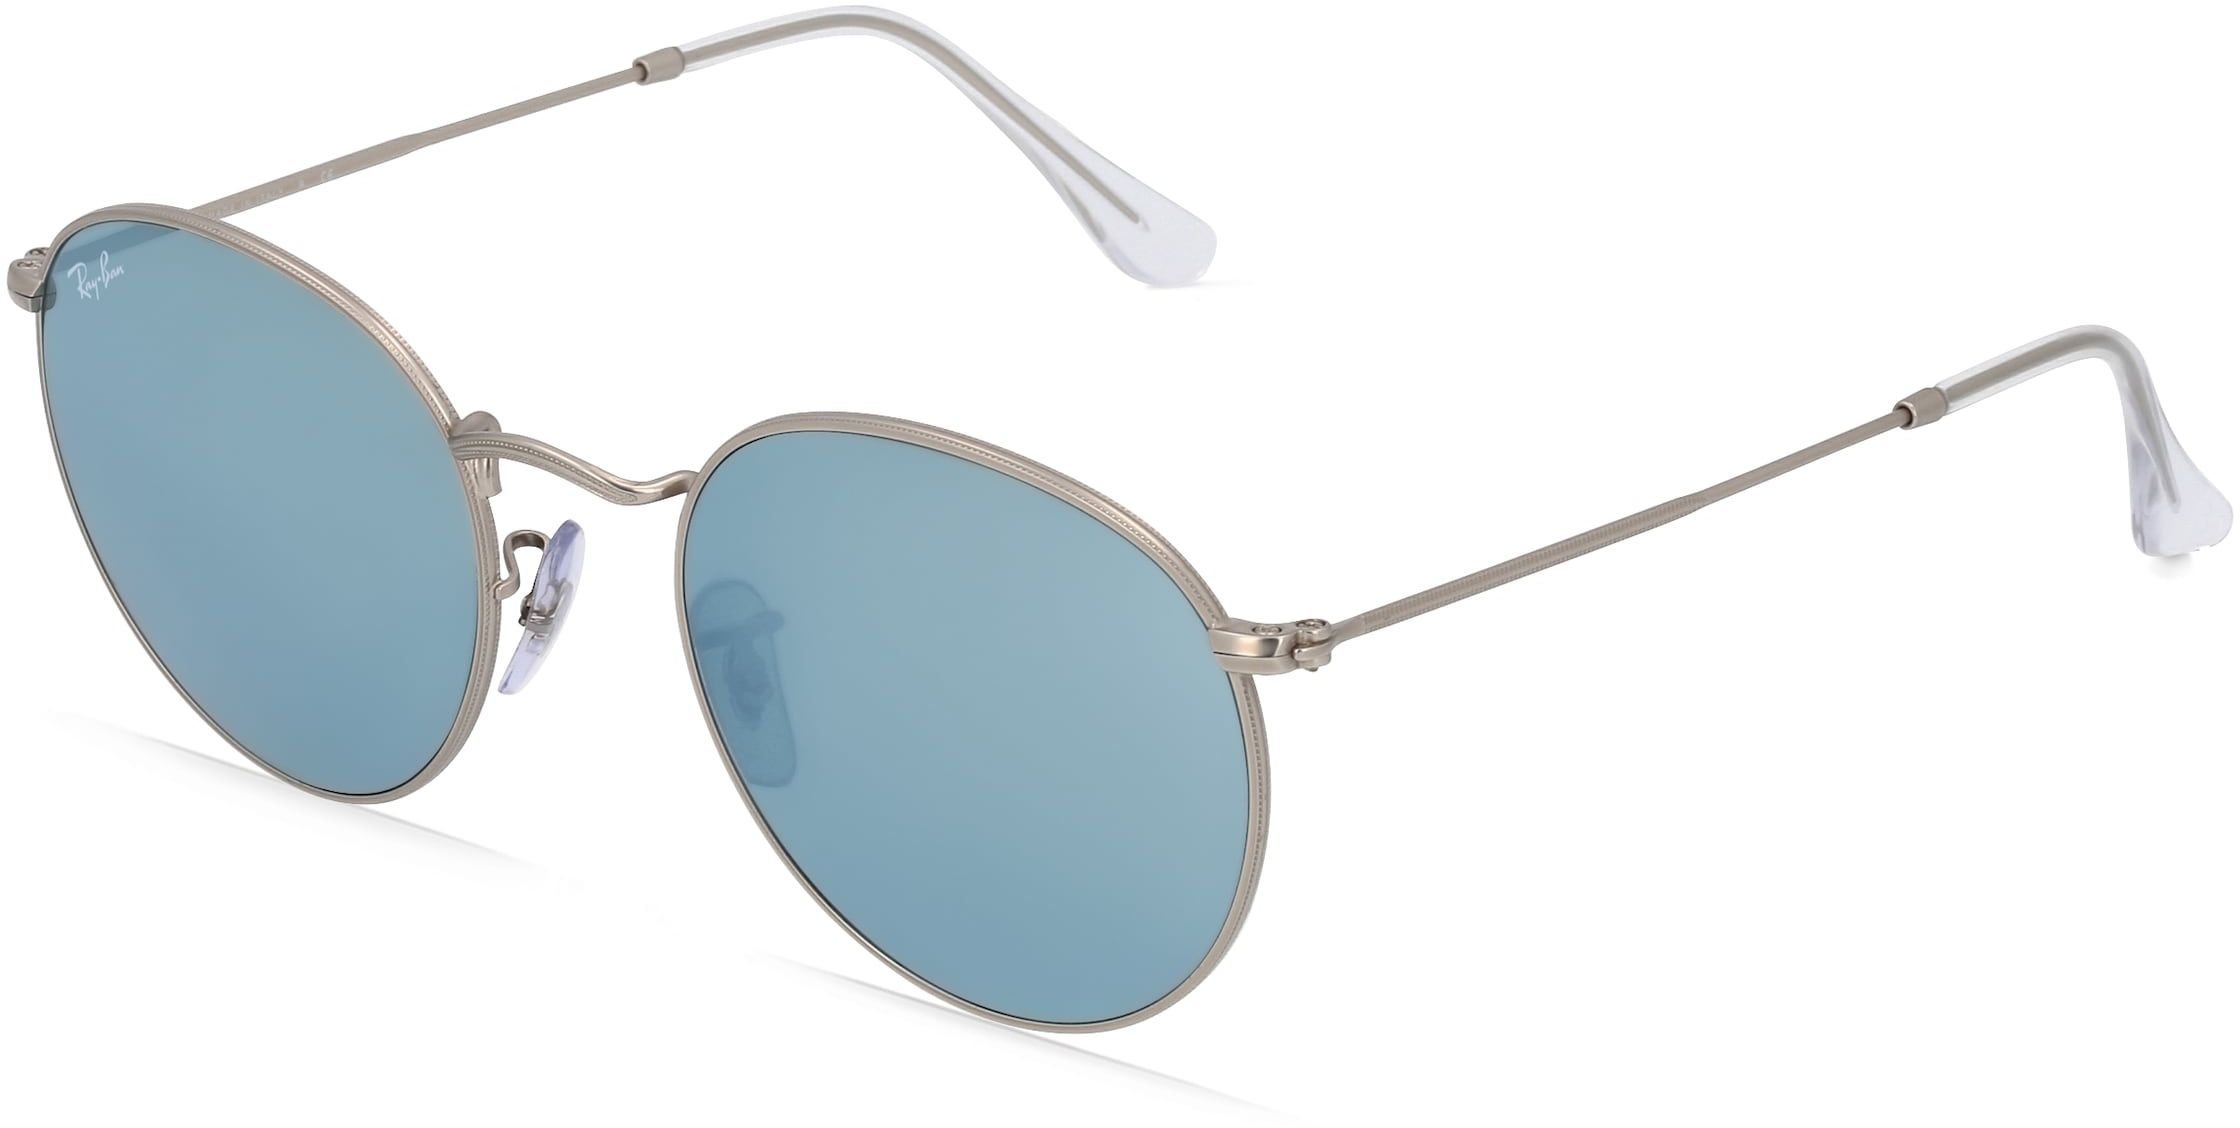 Ray-Ban RB 3447 ROUND METAL Unisex-Sonnenbrille Vollrand Panto Metall-Gestell, silber